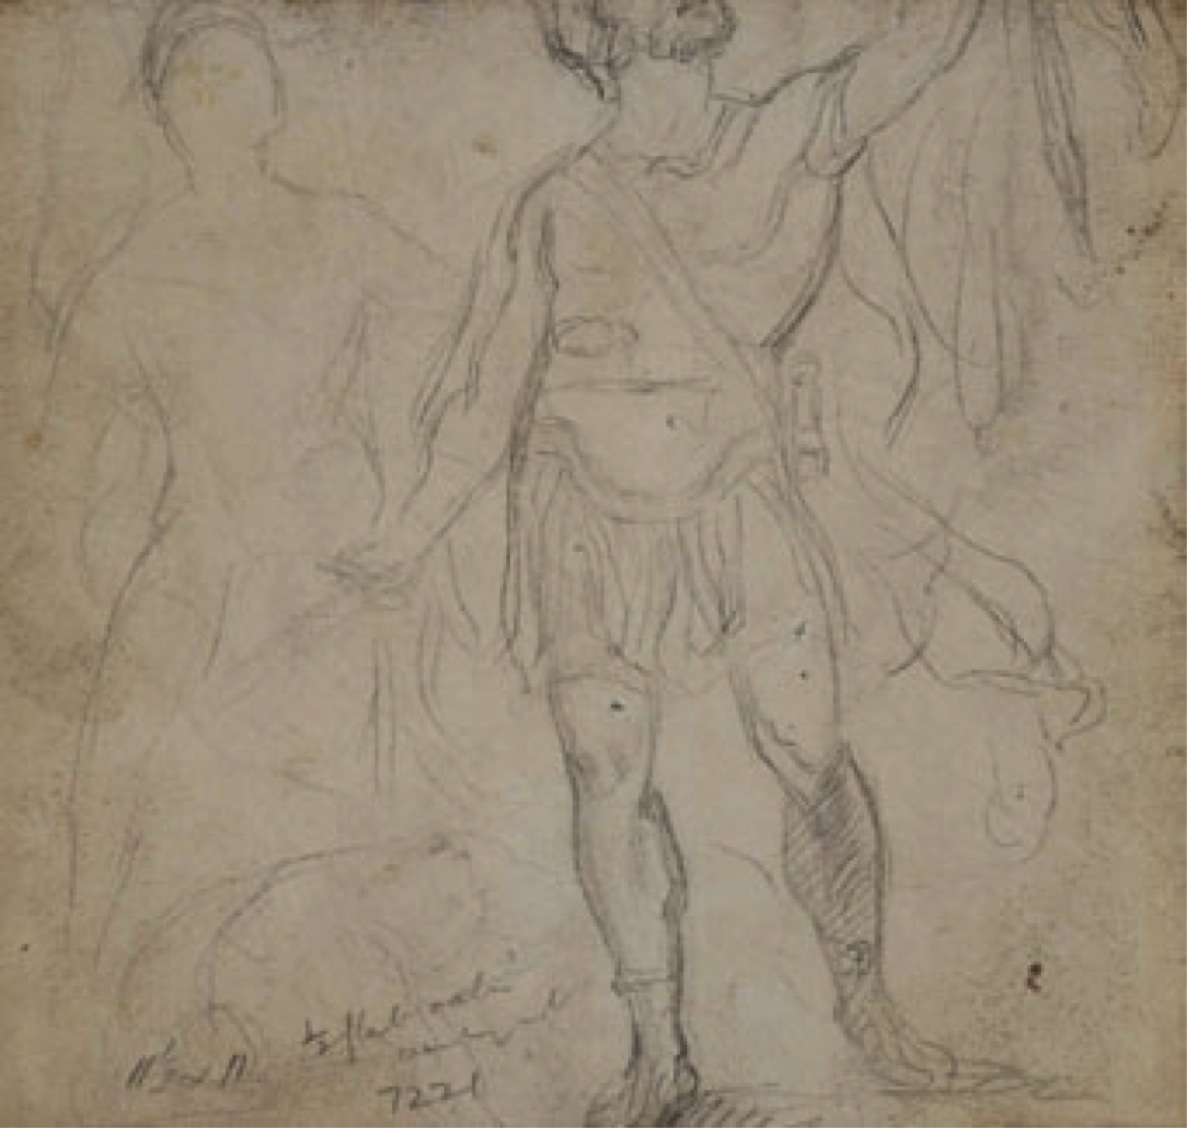 Collections of Drawings antique (10308).jpg